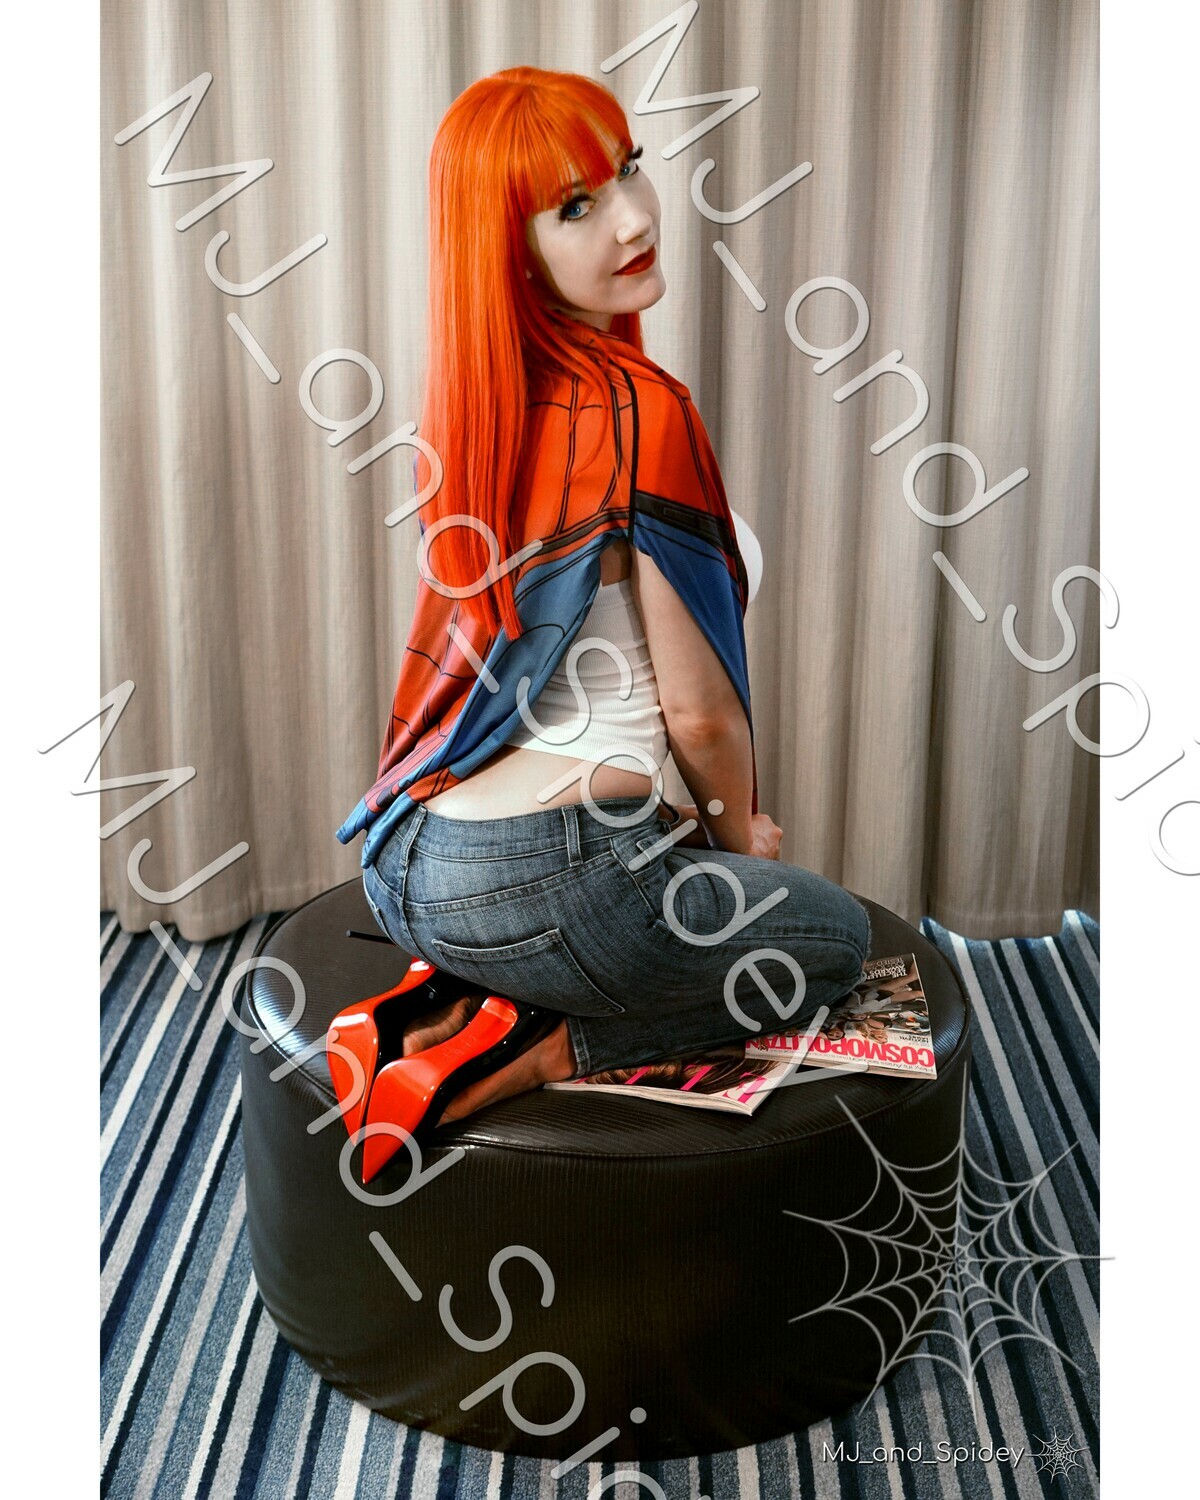 Marvel - Spider-Man - Mary Jane Watson - Campbell 4 - Digital Cosplay Image (@MJ_and_Spidey, MJ and Spidey, Comics)